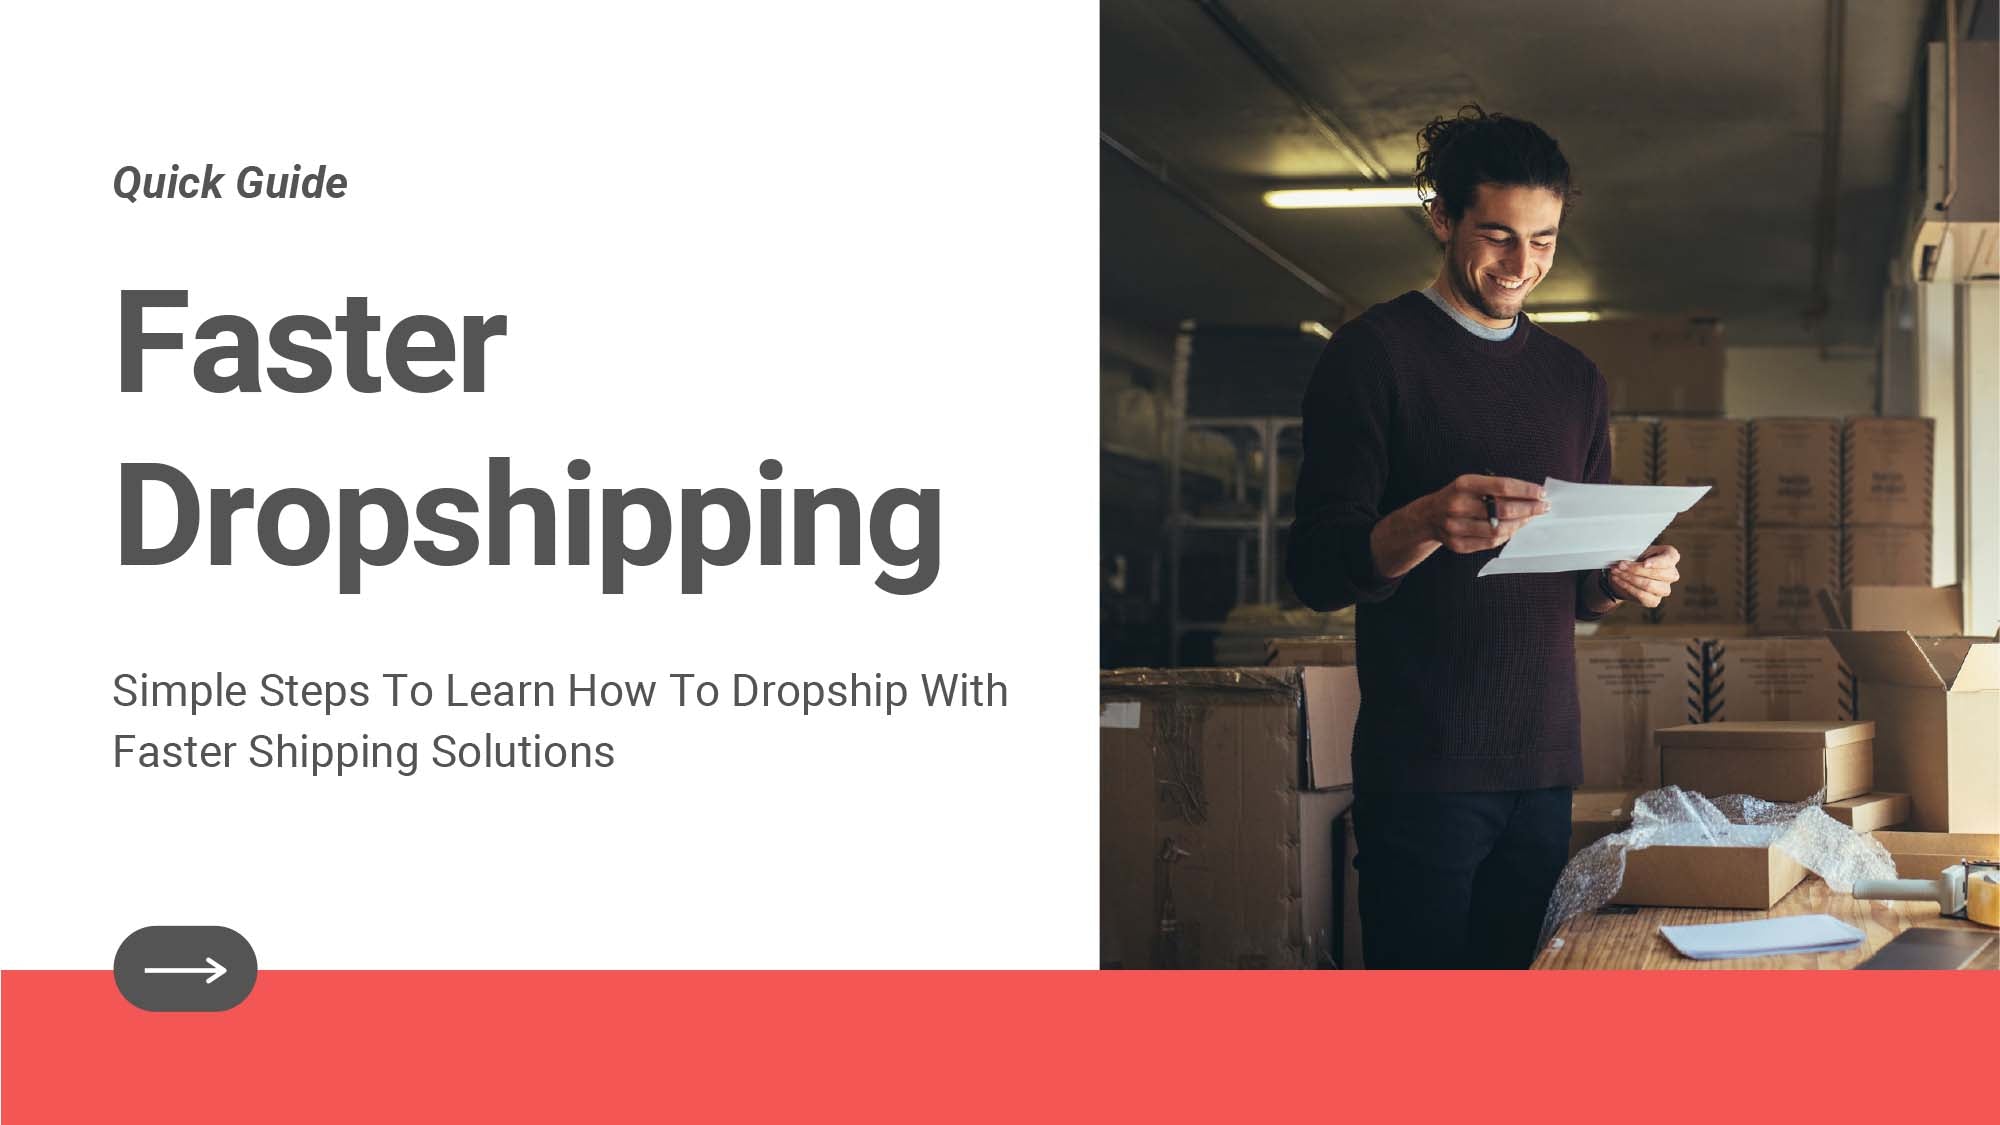 Simple Steps To Learn How To Dropship With Faster Shipping Solutions!